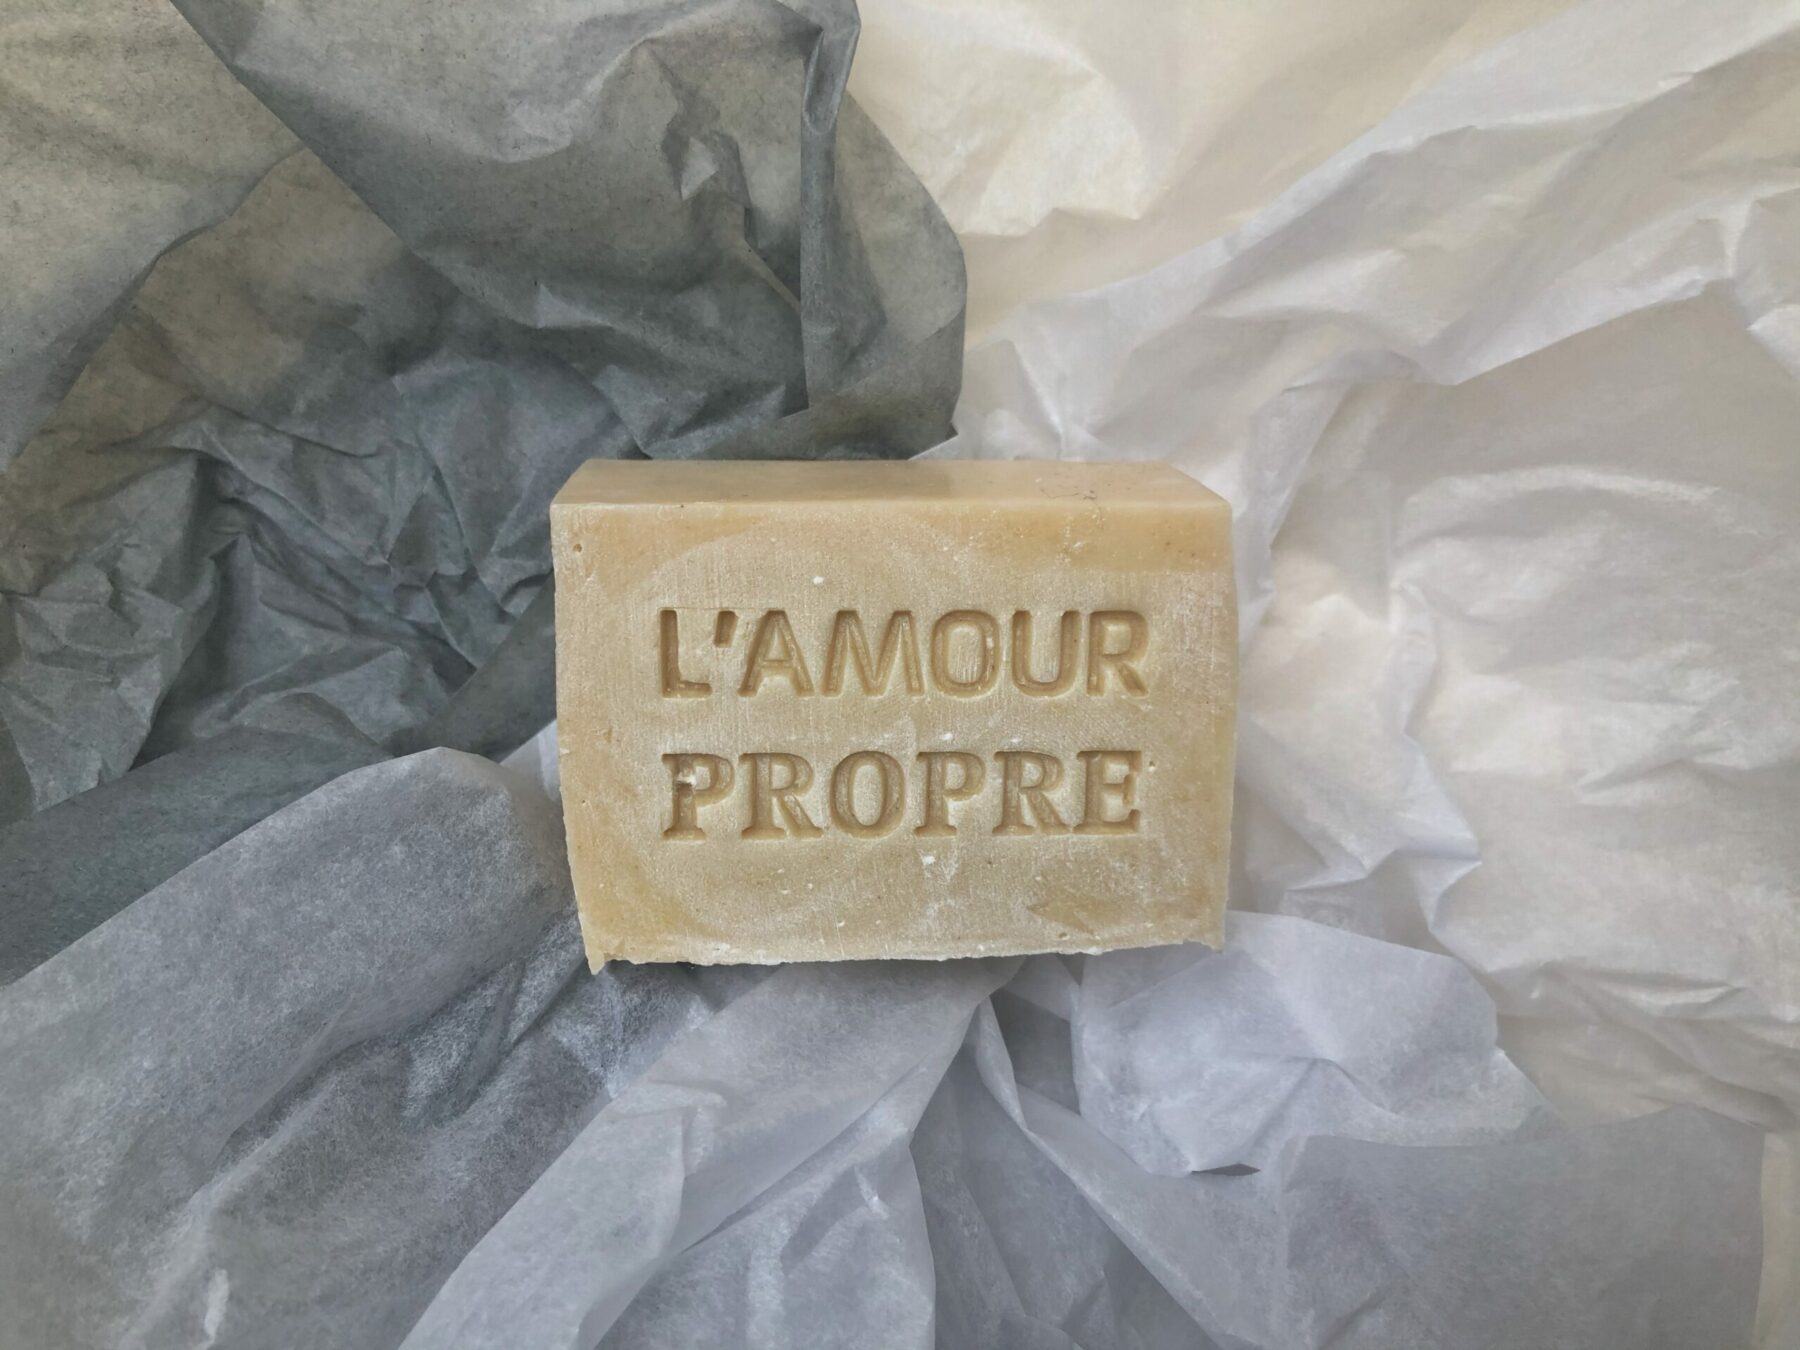 IMG 4770 scaled e1664979015785 - L'amour propre-savons -